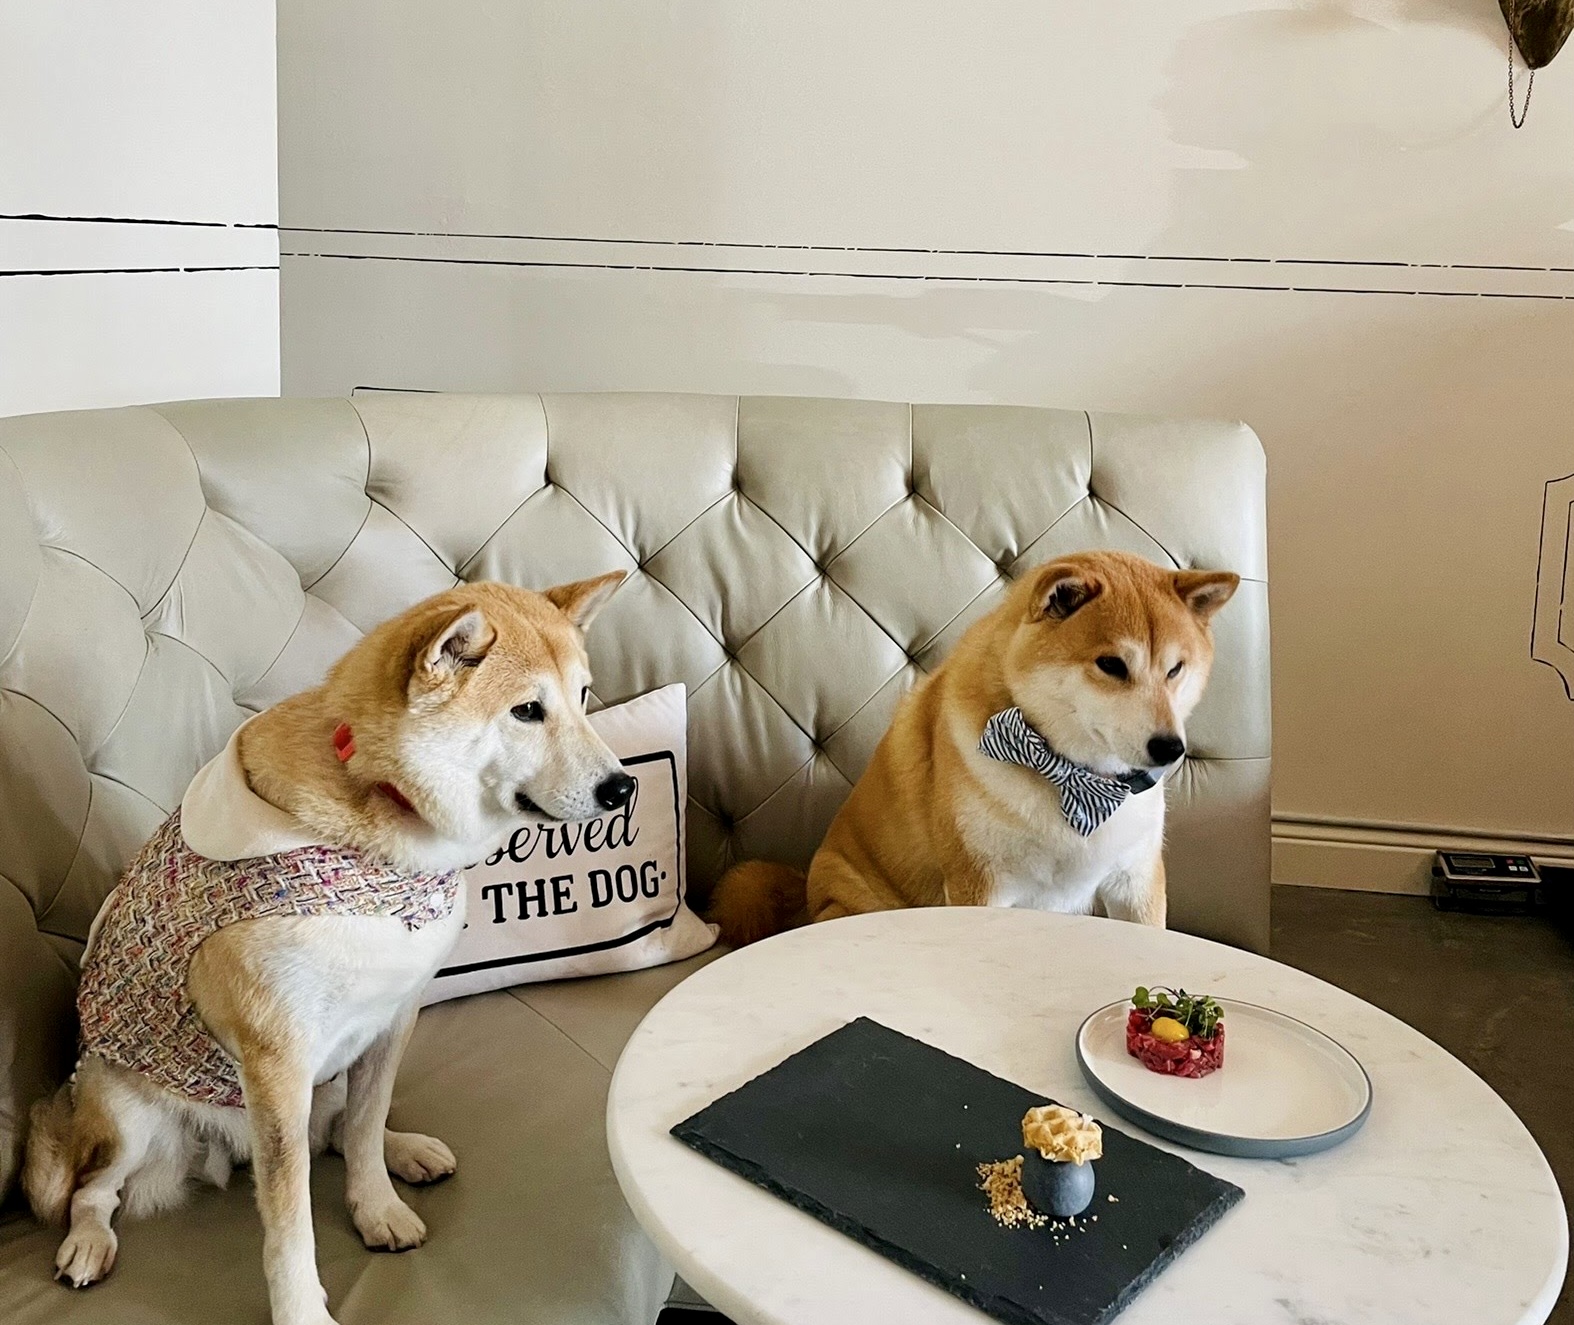 sf-has-a-fine-dining-restaurant-for-dogs-with-75-tasting-menu